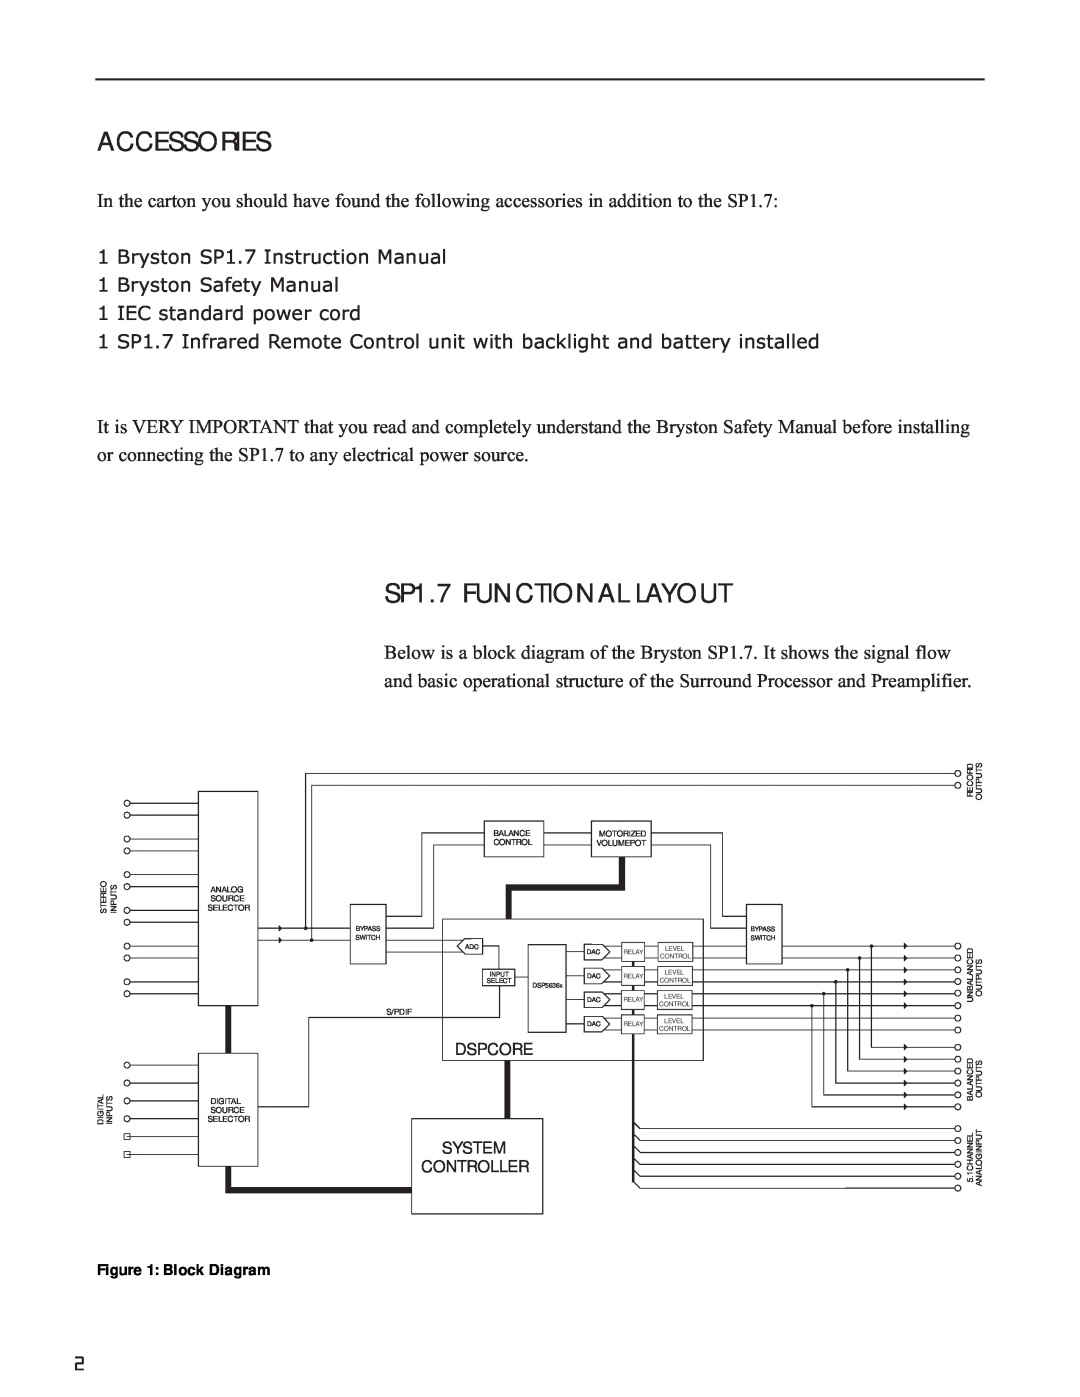 Bryston SP1.7 Series manual Accessories, SP1.7 FUNCTIONAL LAYOUT, Bryston Safety Manual 1 IEC standard power cord 